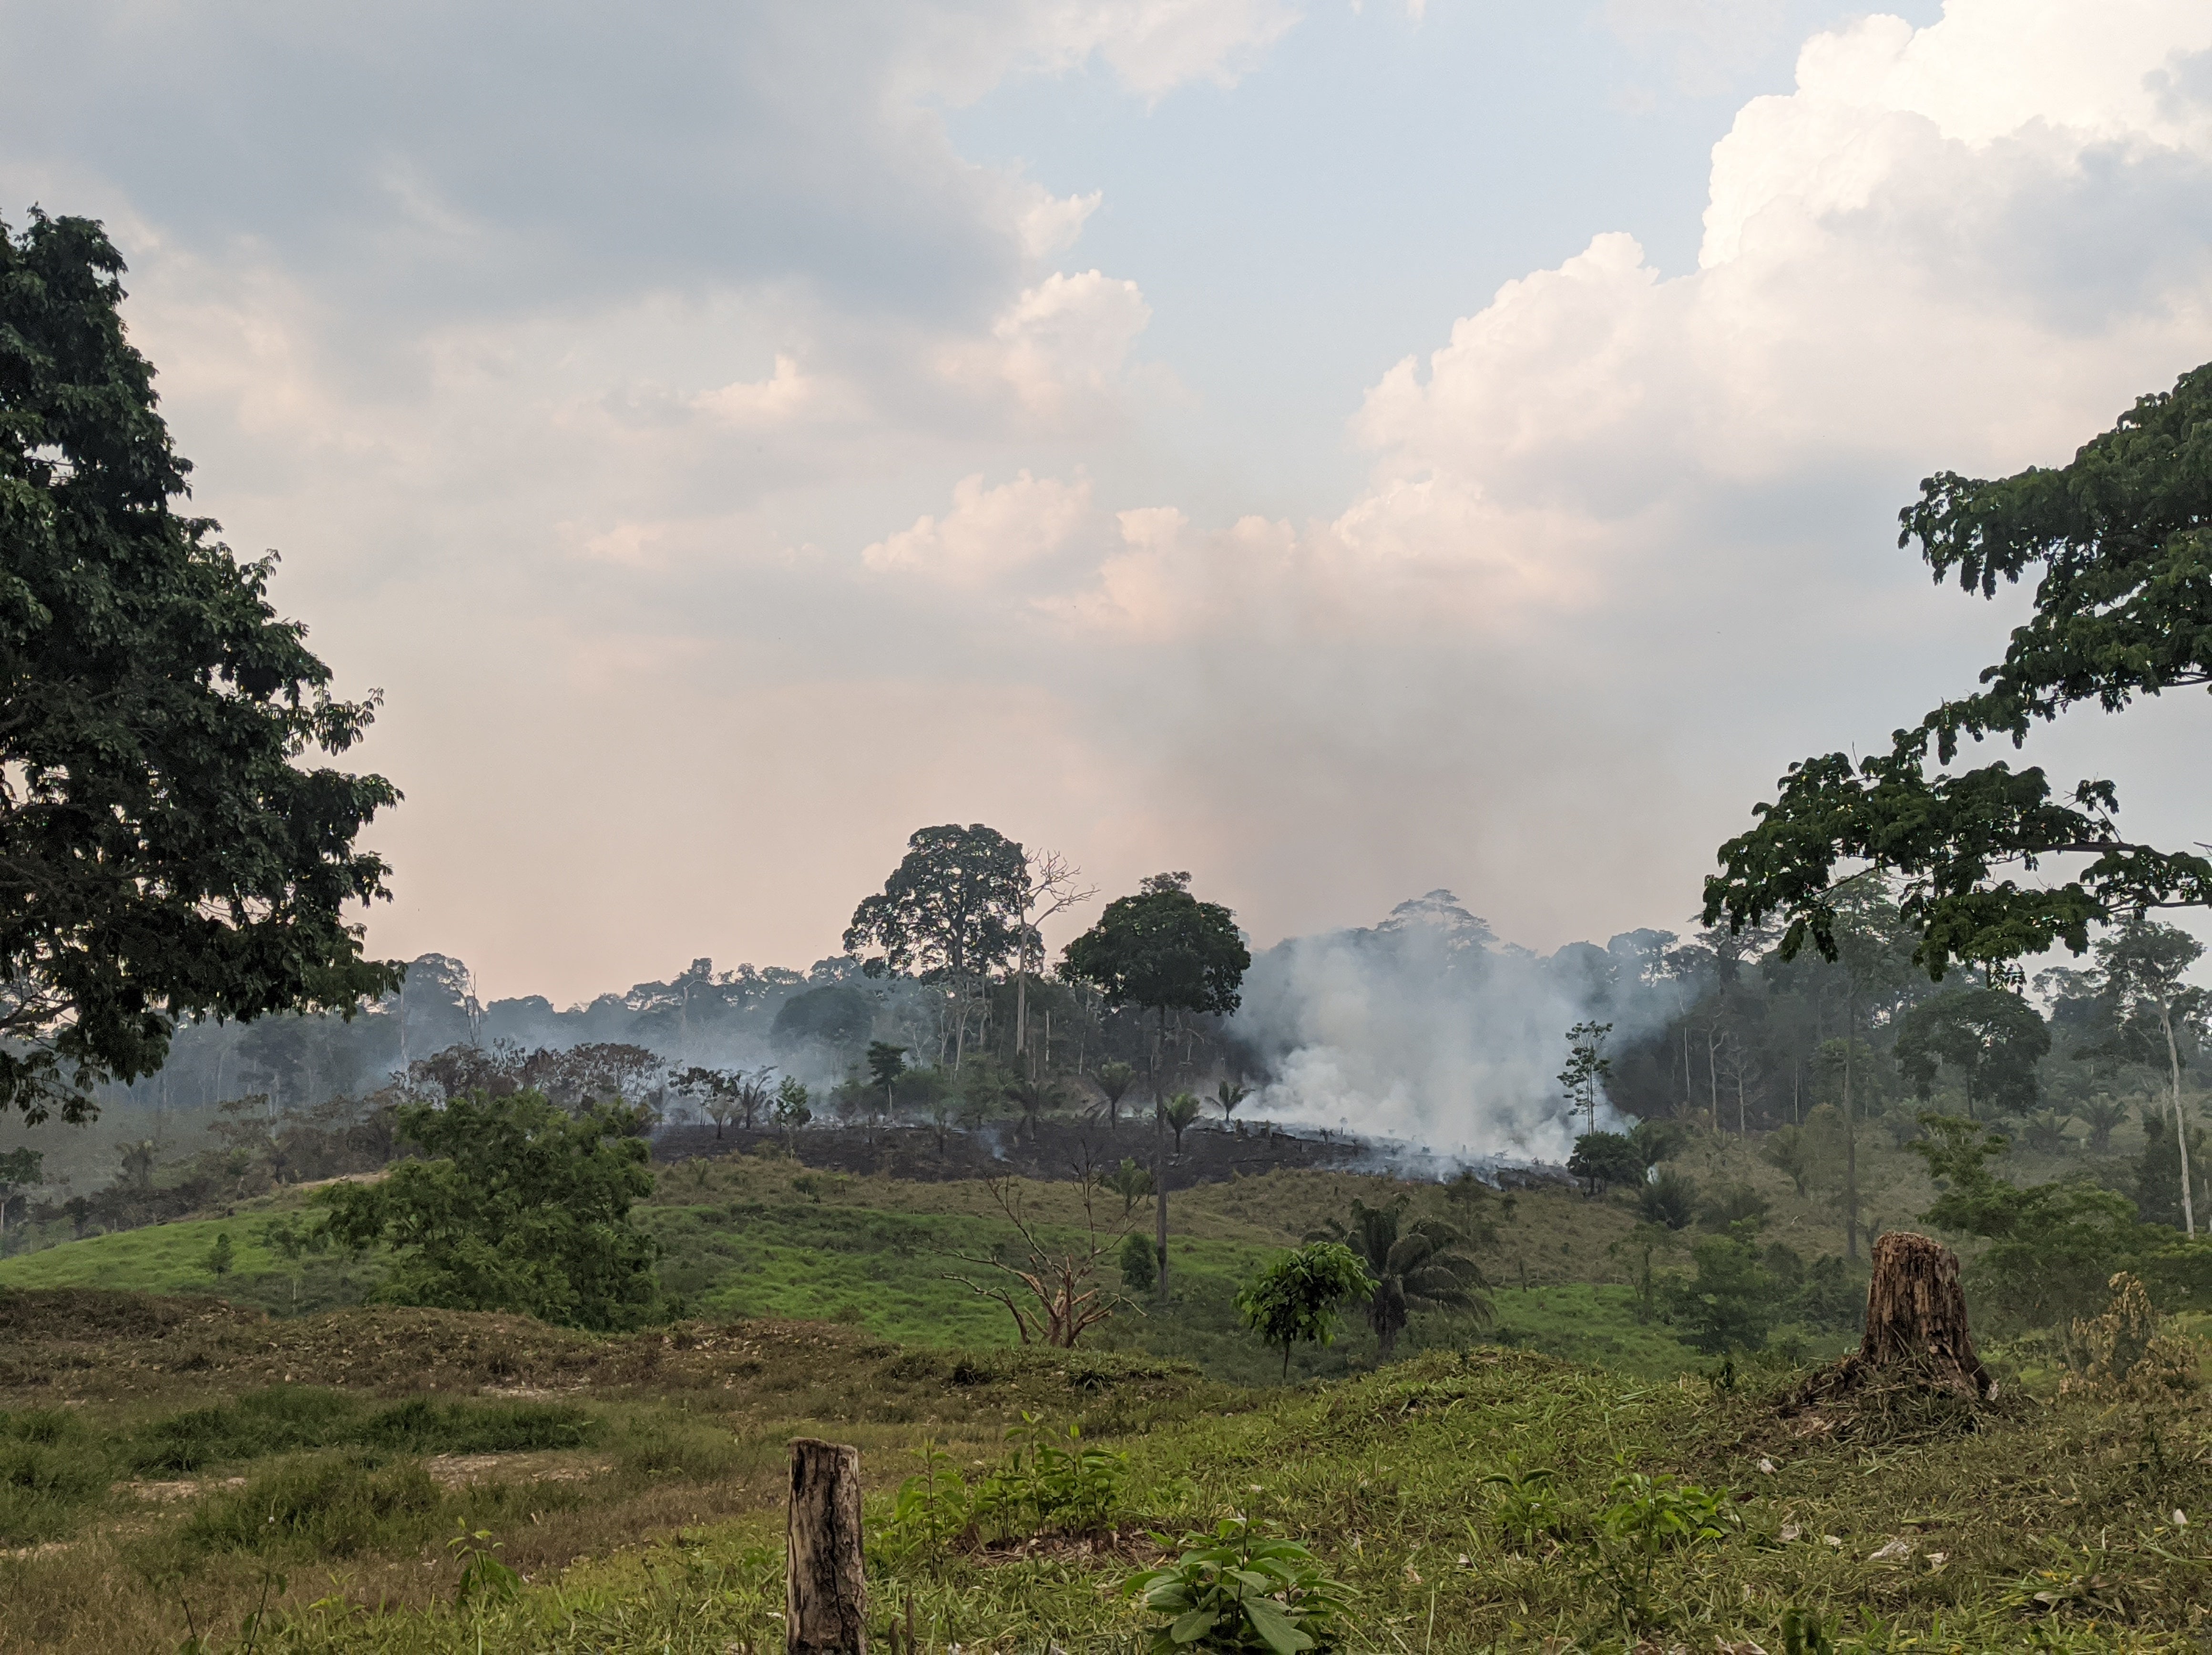 This image shows the destruction in the amazon rain forest. It shows a hills grassland area with tree stumps and smoke in the background.